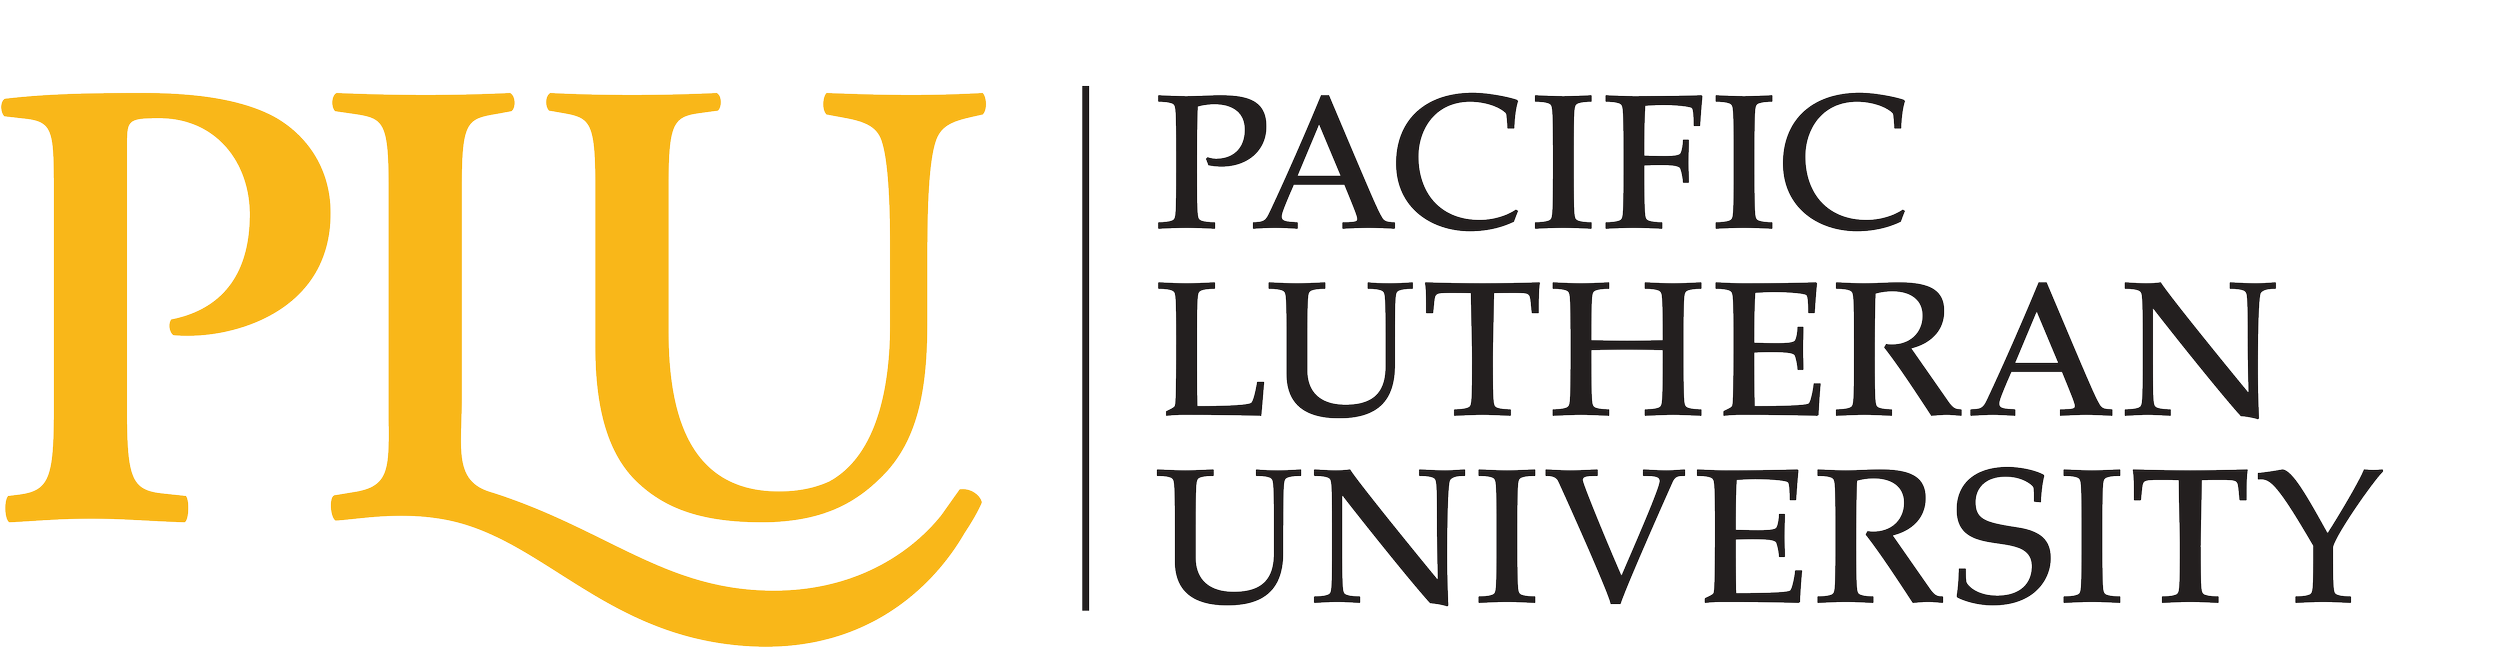 pacific-lutheran-logo.png